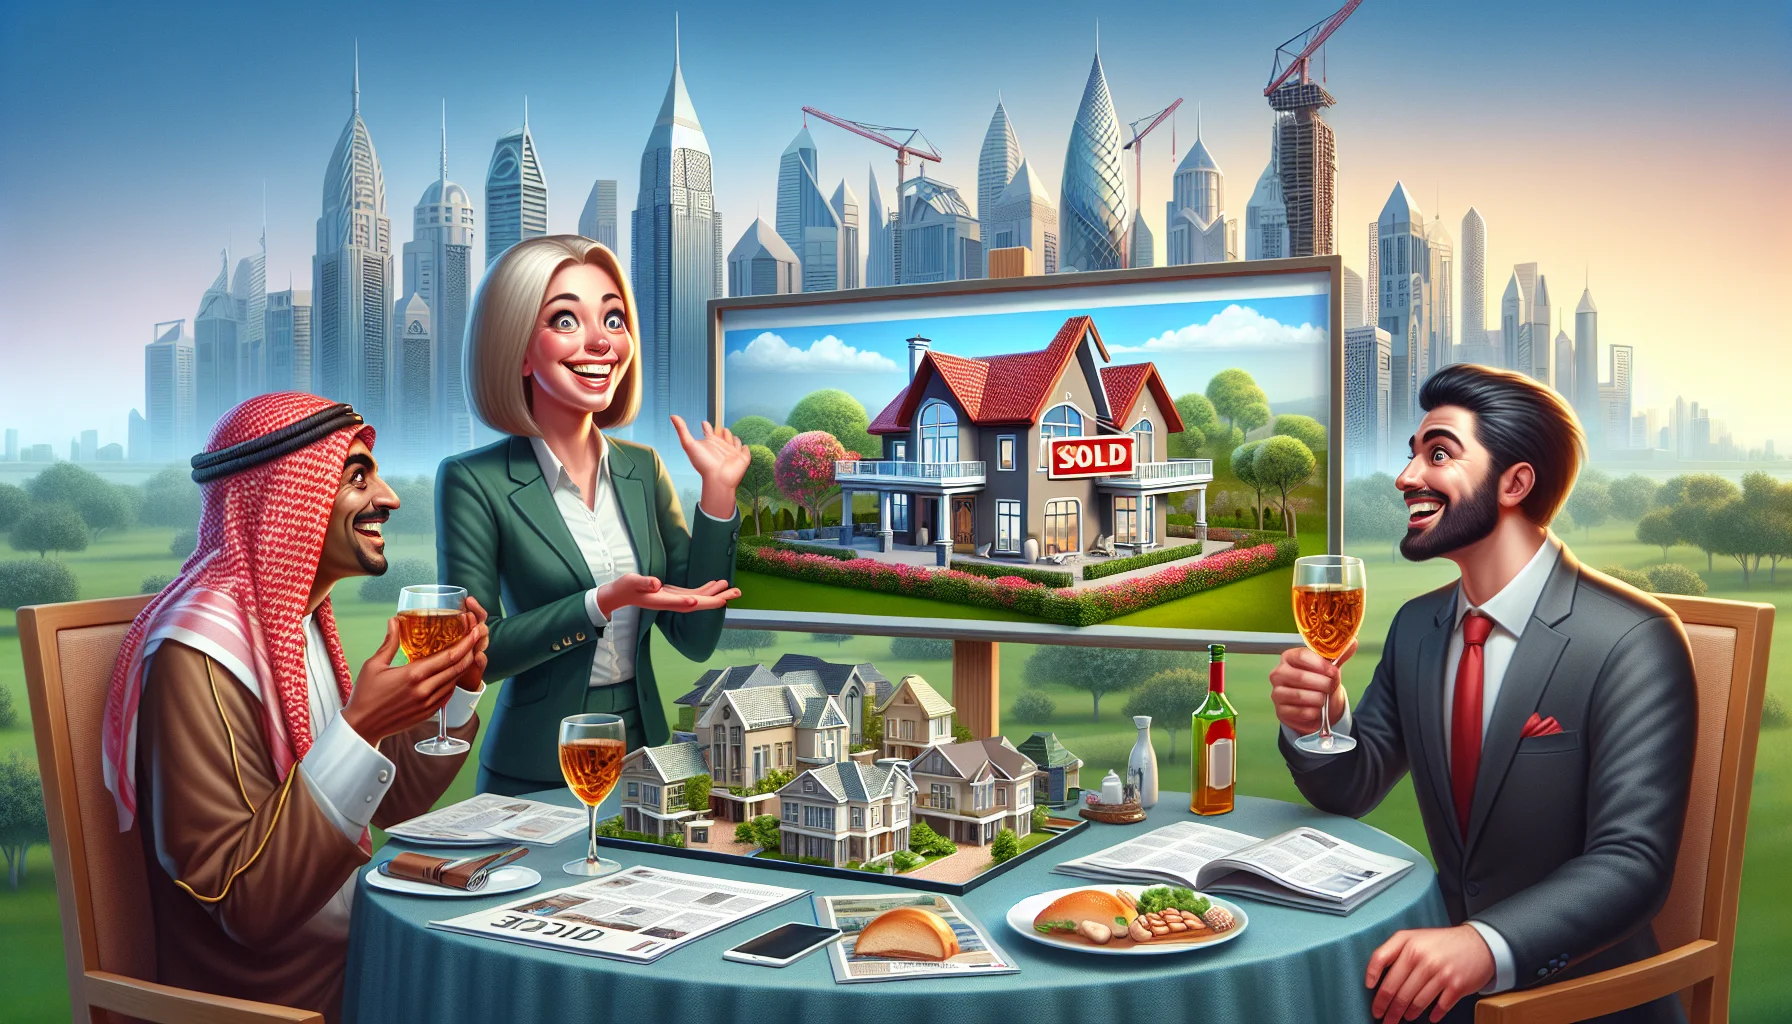 An ideal and humorous scene of real estate trading. The scene shows a Caucasian female agent with a big, warm smile, presenting a miniature model of a beautifully designed big house with a red roof and green garden to a pleasantly surprised Middle Eastern male client. Nearby, a large billboard displays the words 'SOLD'. In the background, there's a bustling cityscape with skyscrapers, creating a contrasting scenery. Seated at a table nearby, a South Asian male and a Black female are cheerfully raising their glasses in celebration of their newly bought city apartment shown in a brochure on their table.